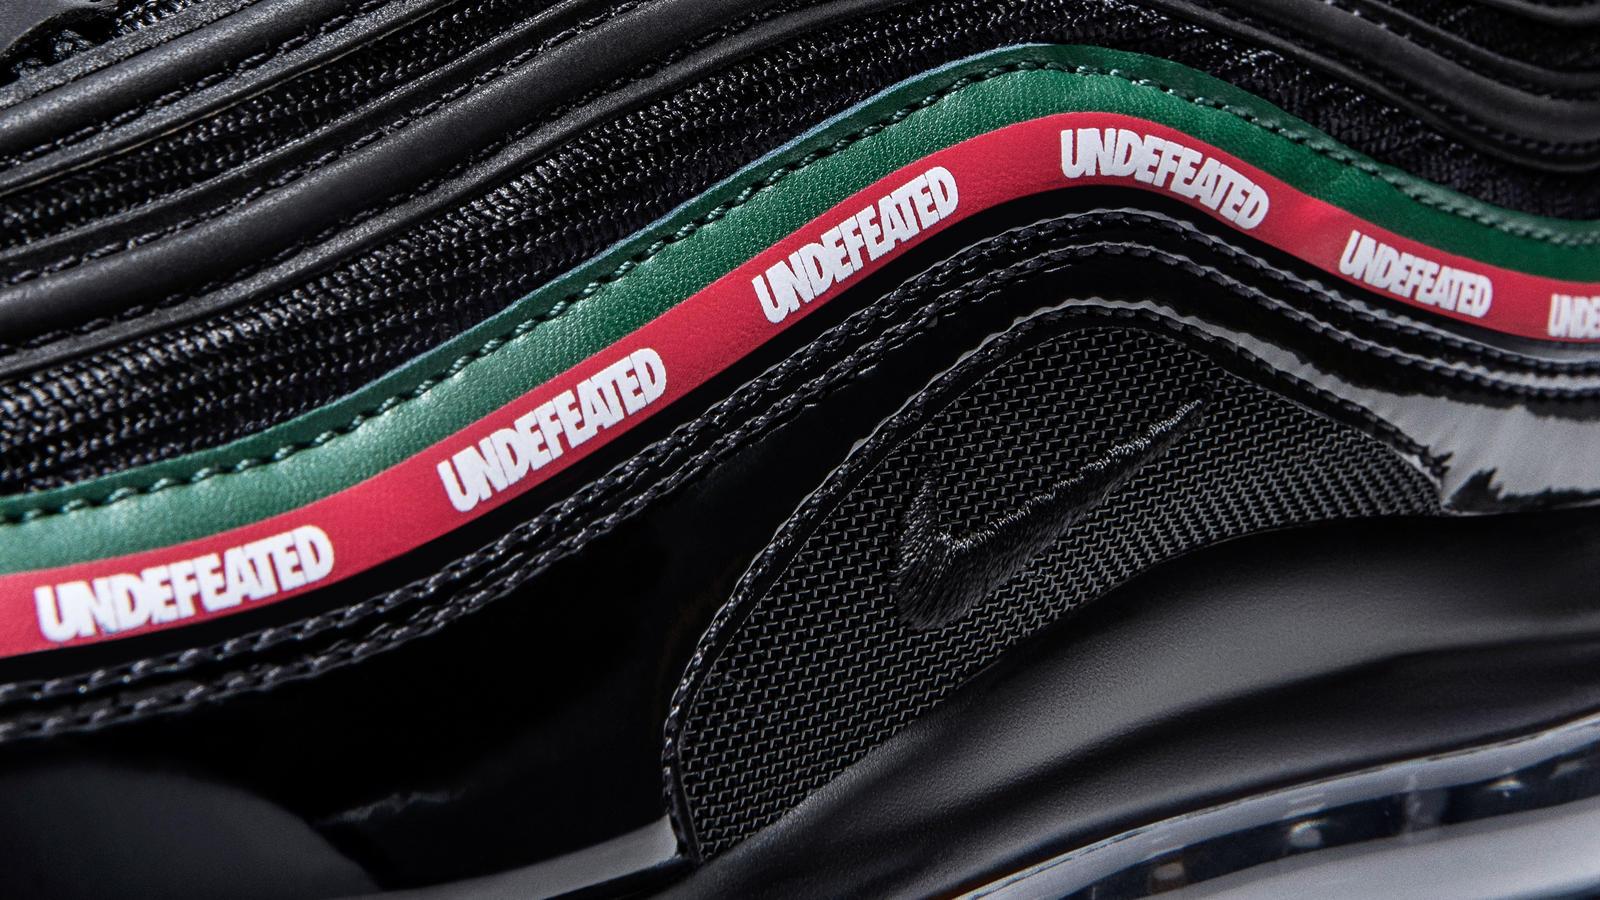 UNDFTD Gives the Air Max 97 a Luxury Twist